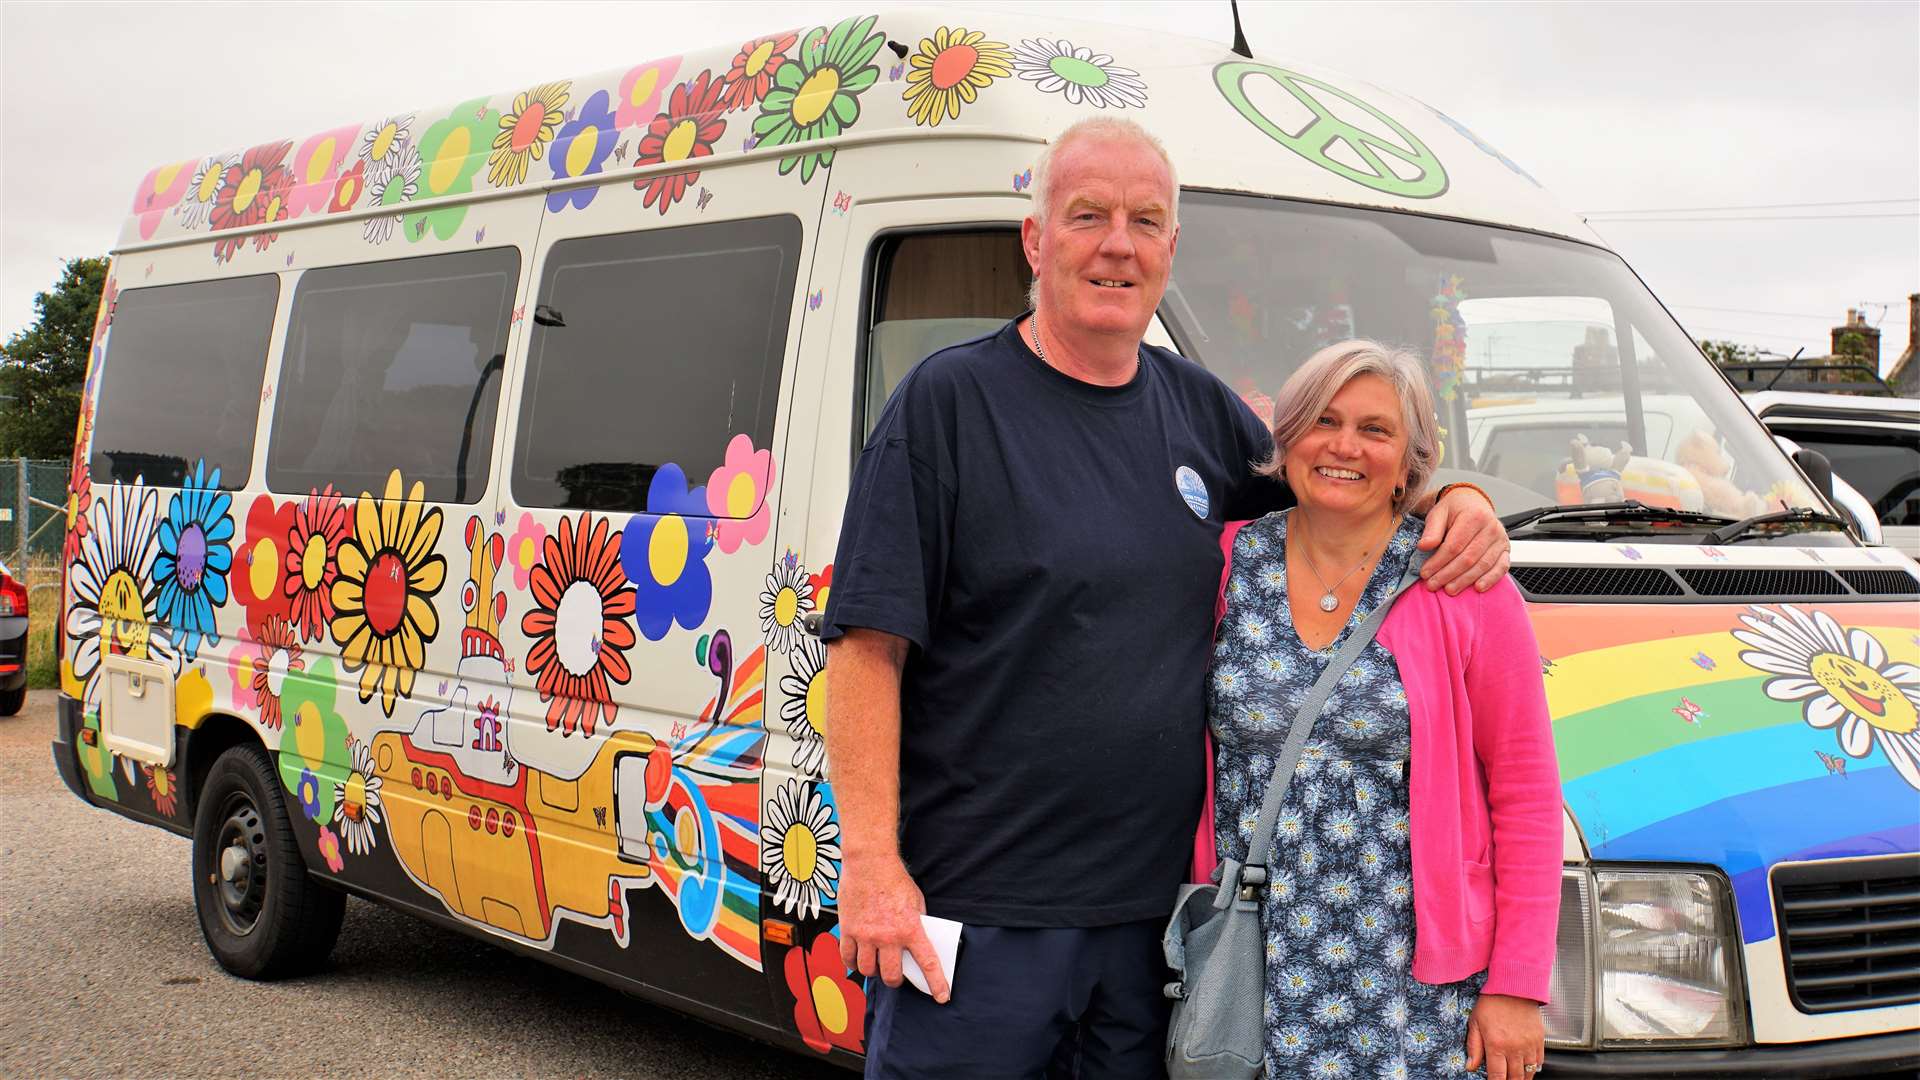 Ian Ferguson and Debbie Price with their converted minibus called Daisy.